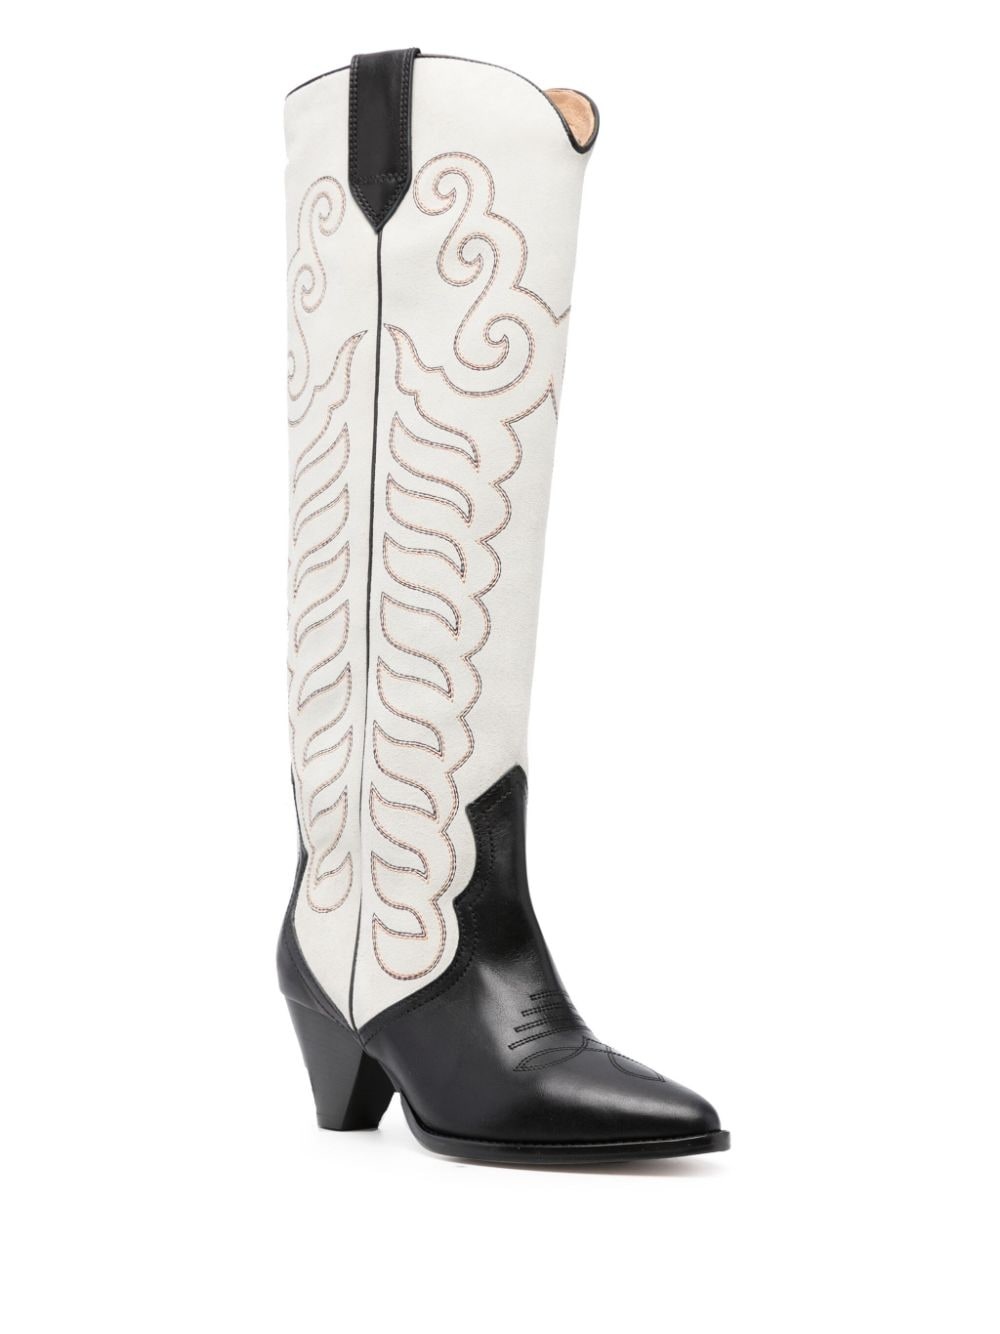 Liela 60mm embroidered leather boots - 2